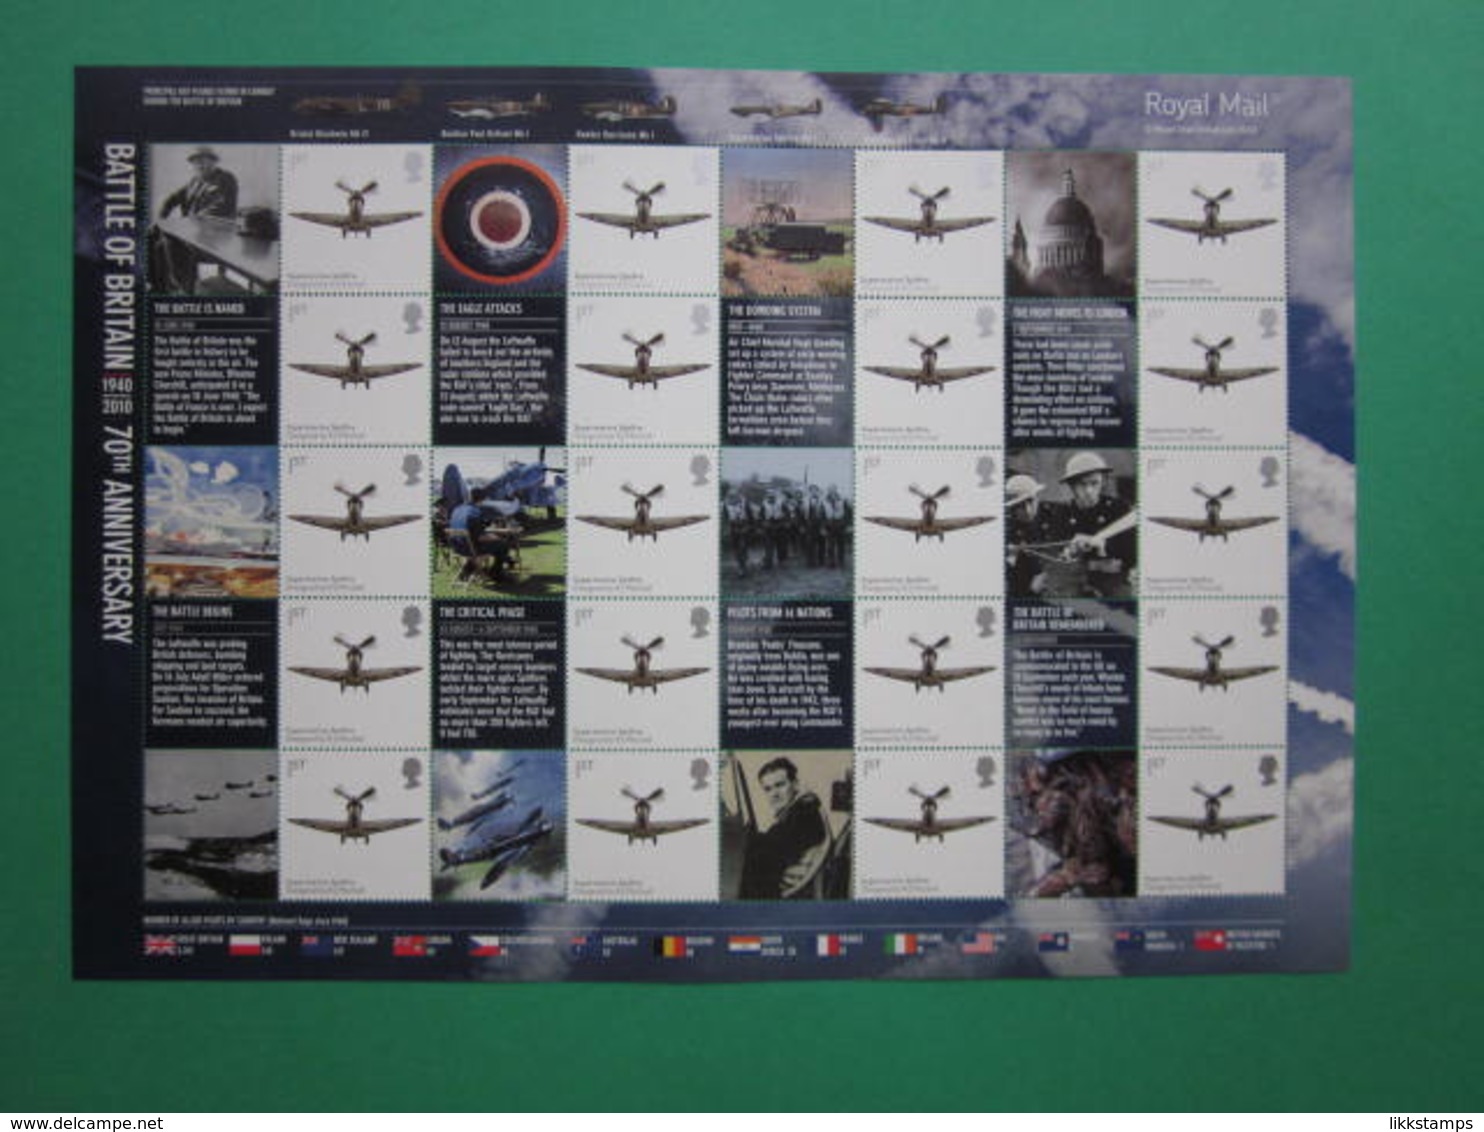 2010 ROYAL MAIL THE 70th ANNIVERSARY OF THE BATTLE OF BRITAIN GENERIC SMILERS SHEET. #SS0071 - Smilers Sheets